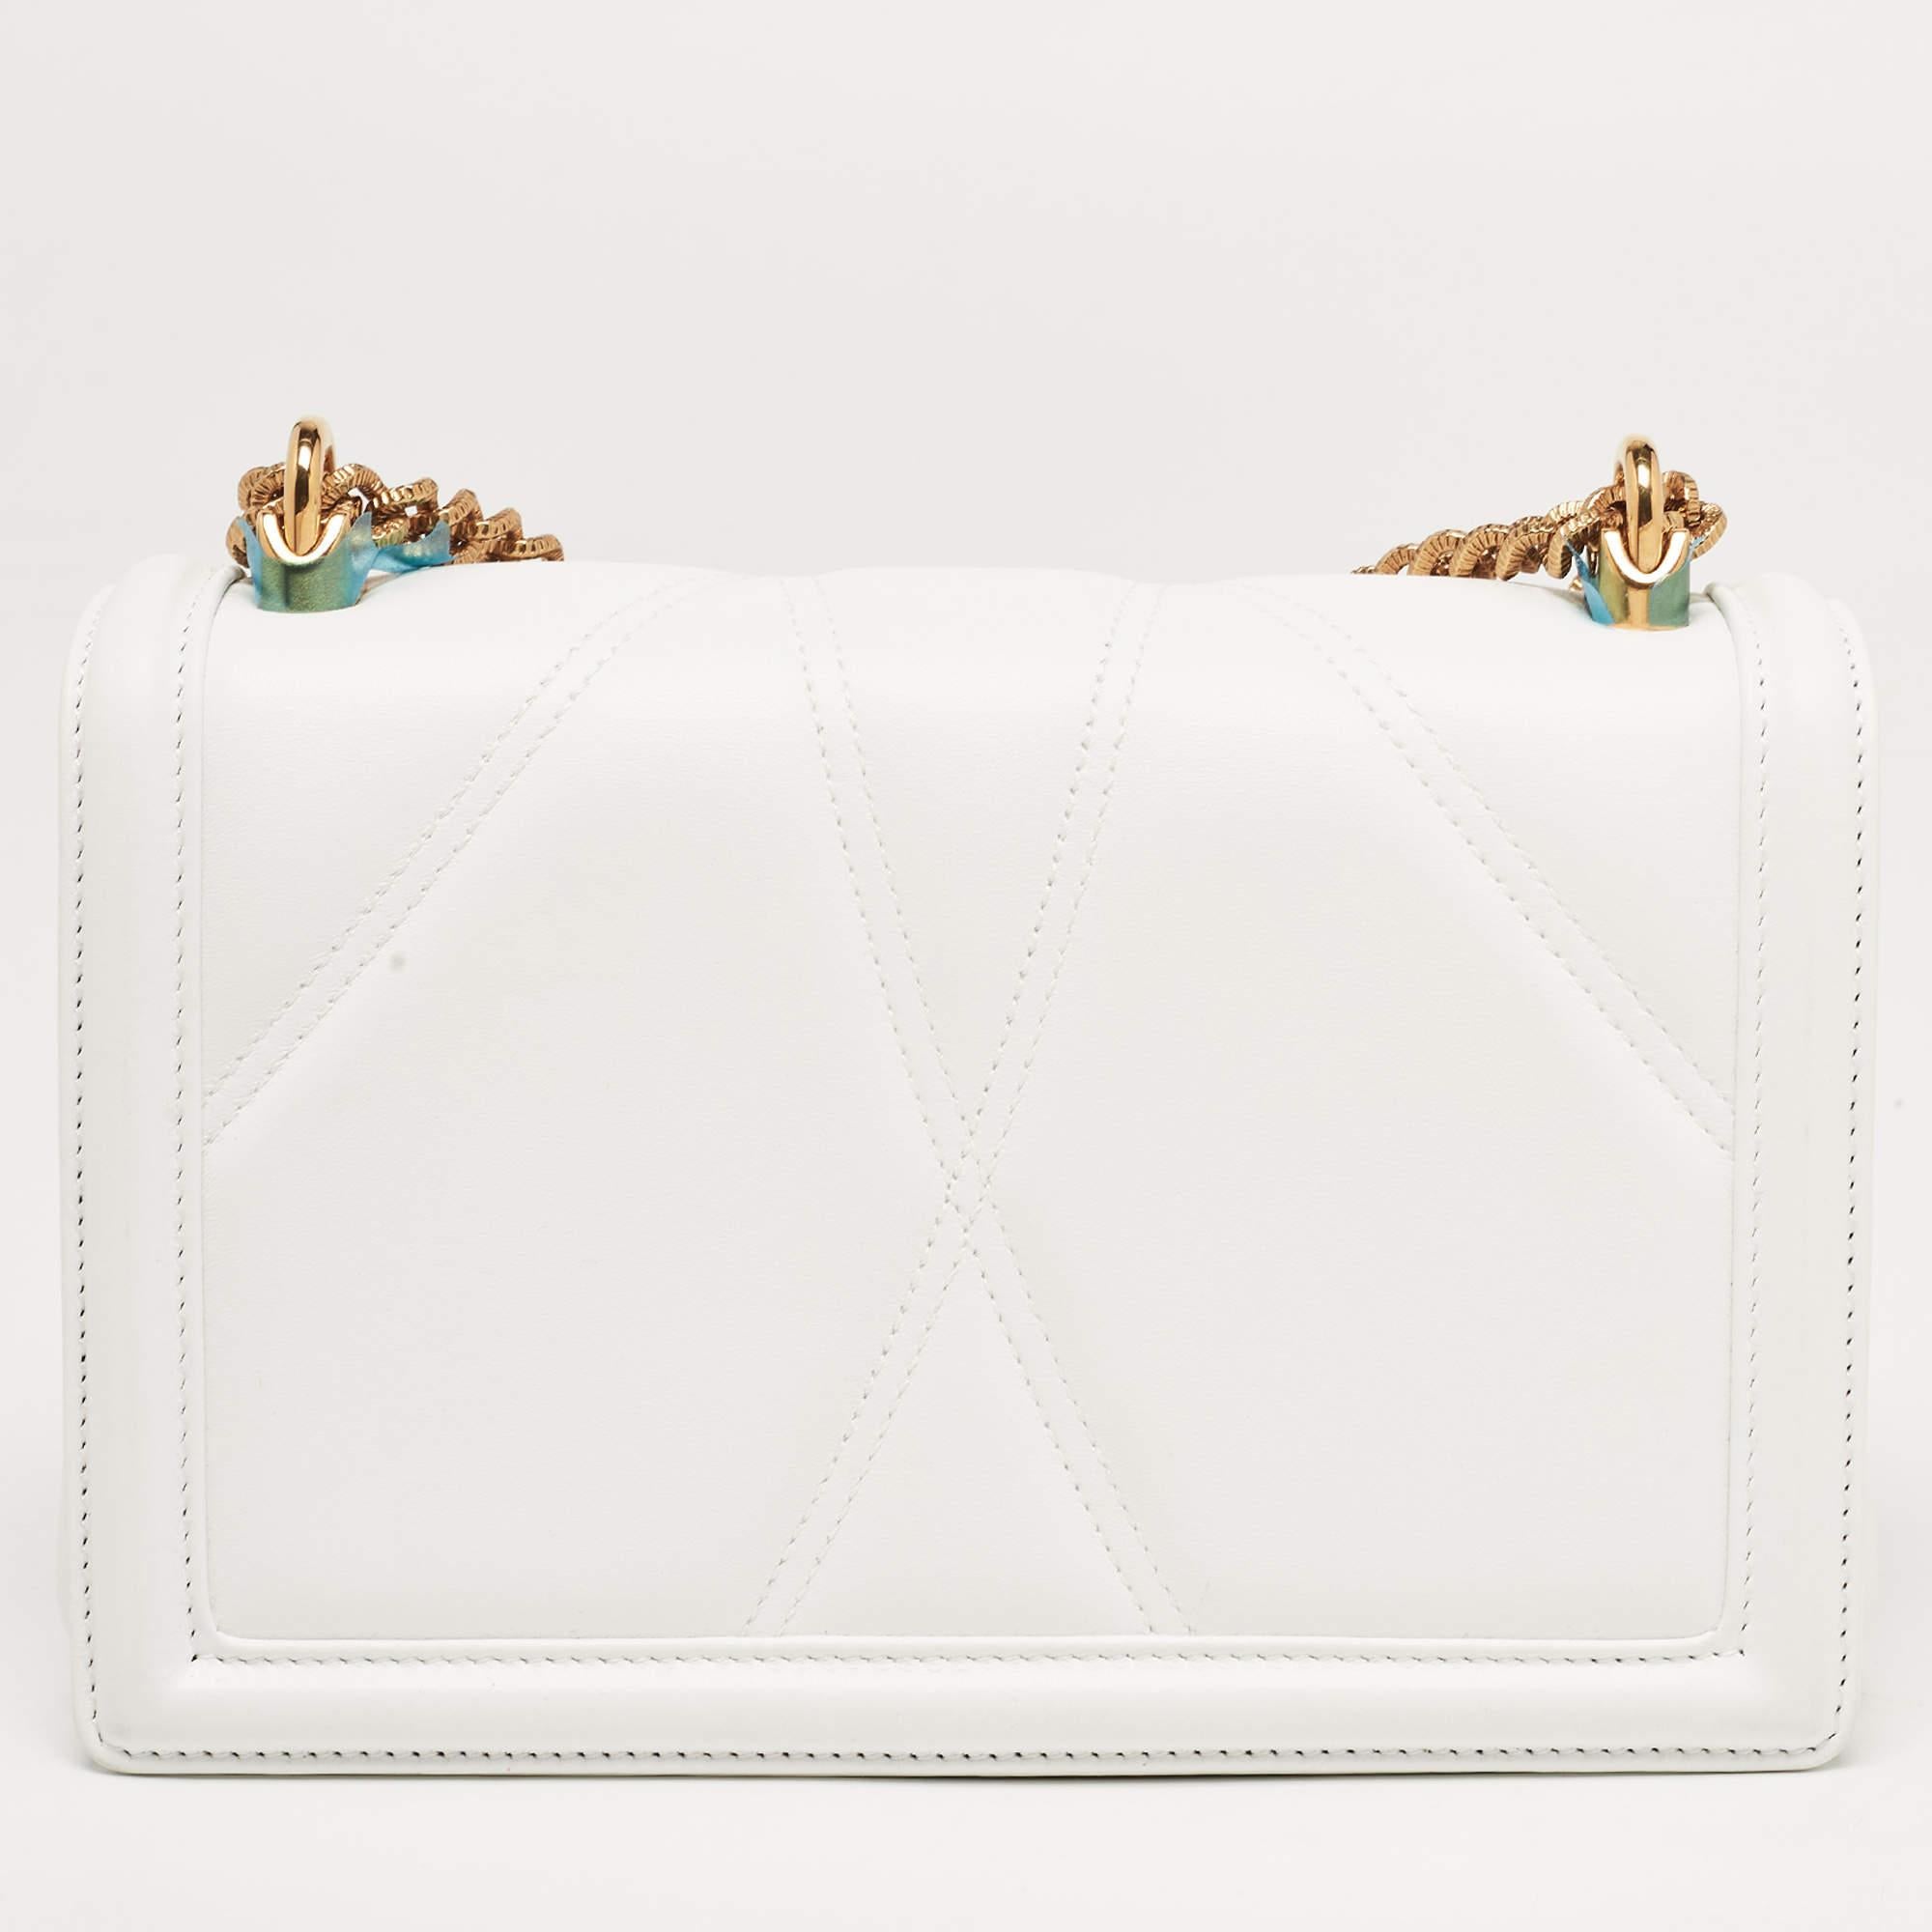 This Devotion Mordore shoulder bag from the House of Dolce & Gabbana is both elegant and fashionable. Crafted from white leather on the exterior, this bag features a top handle, gold-tone hardware, and a leather-lined interior. It has an additional